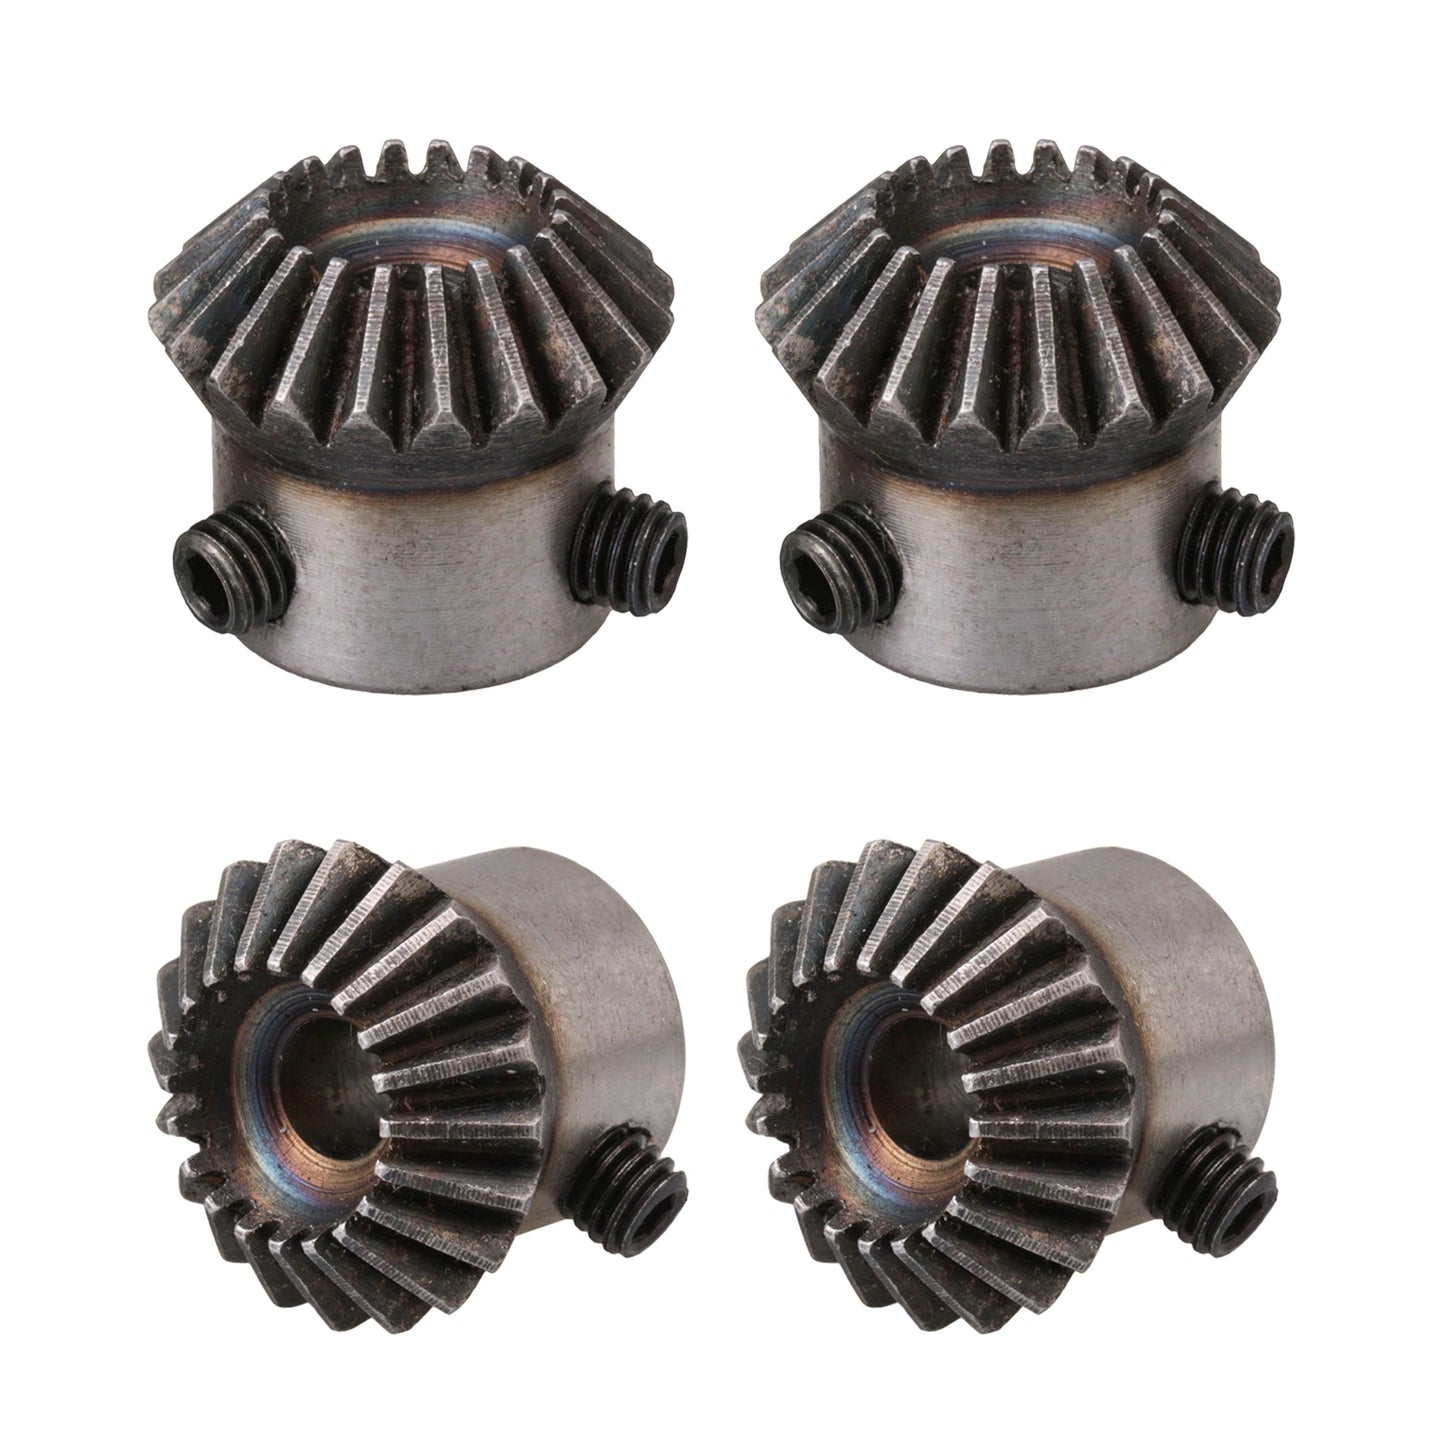 BQLZR Tapered Bevel Motor Driving Gear Wheel 1:1 Ratio 1 Modulus 20 T 0.24inch Pack of 4